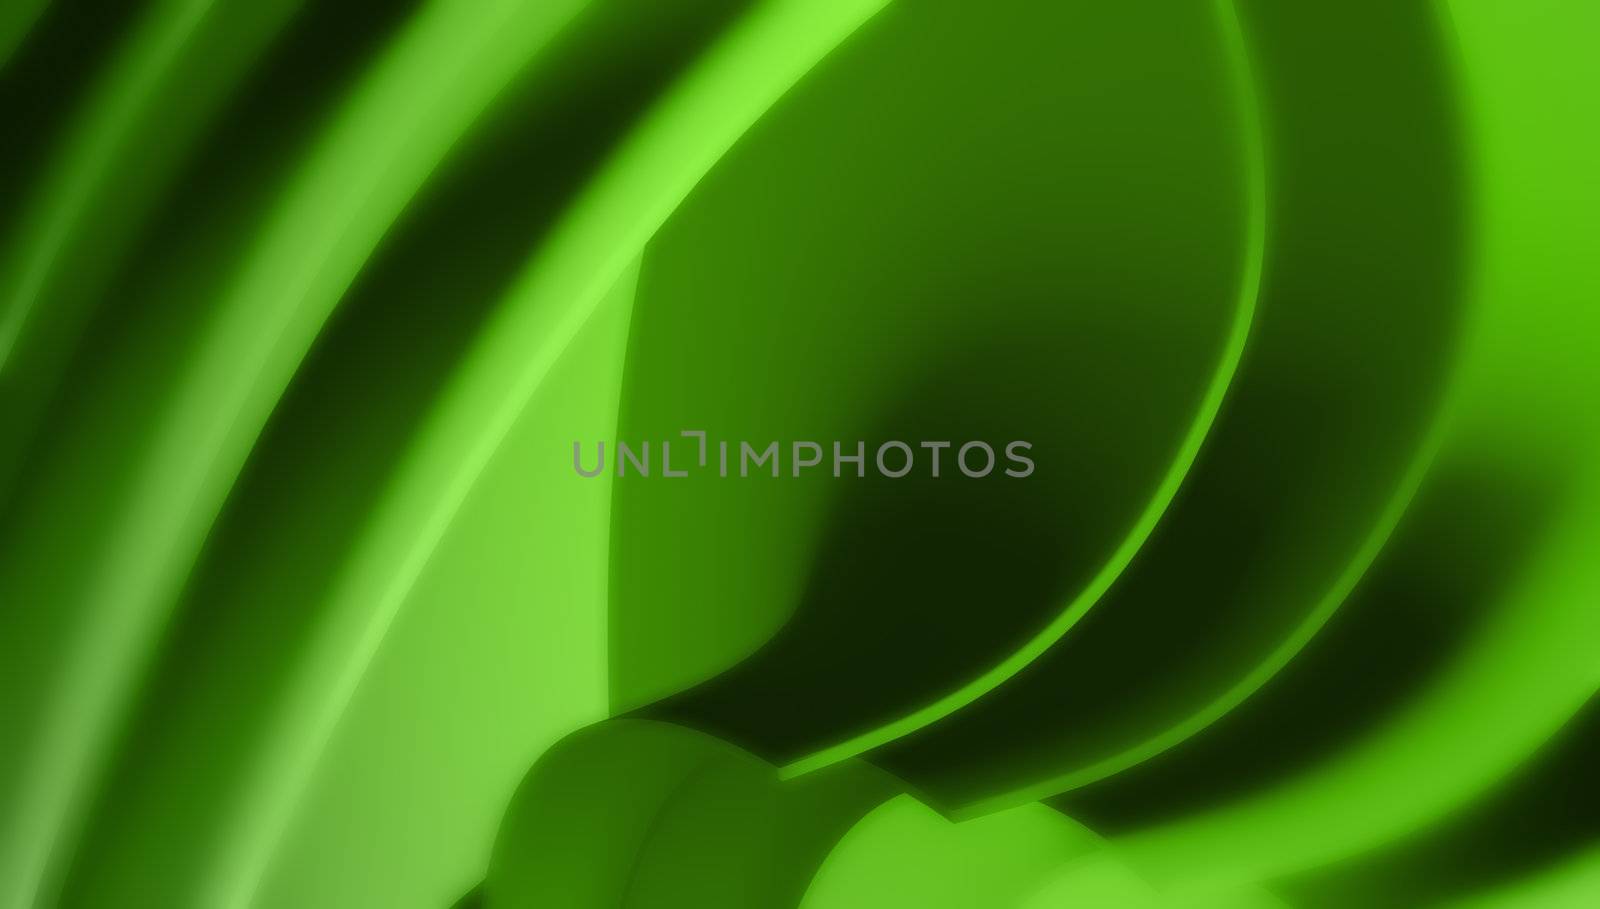 Green 3d waves abstract background.